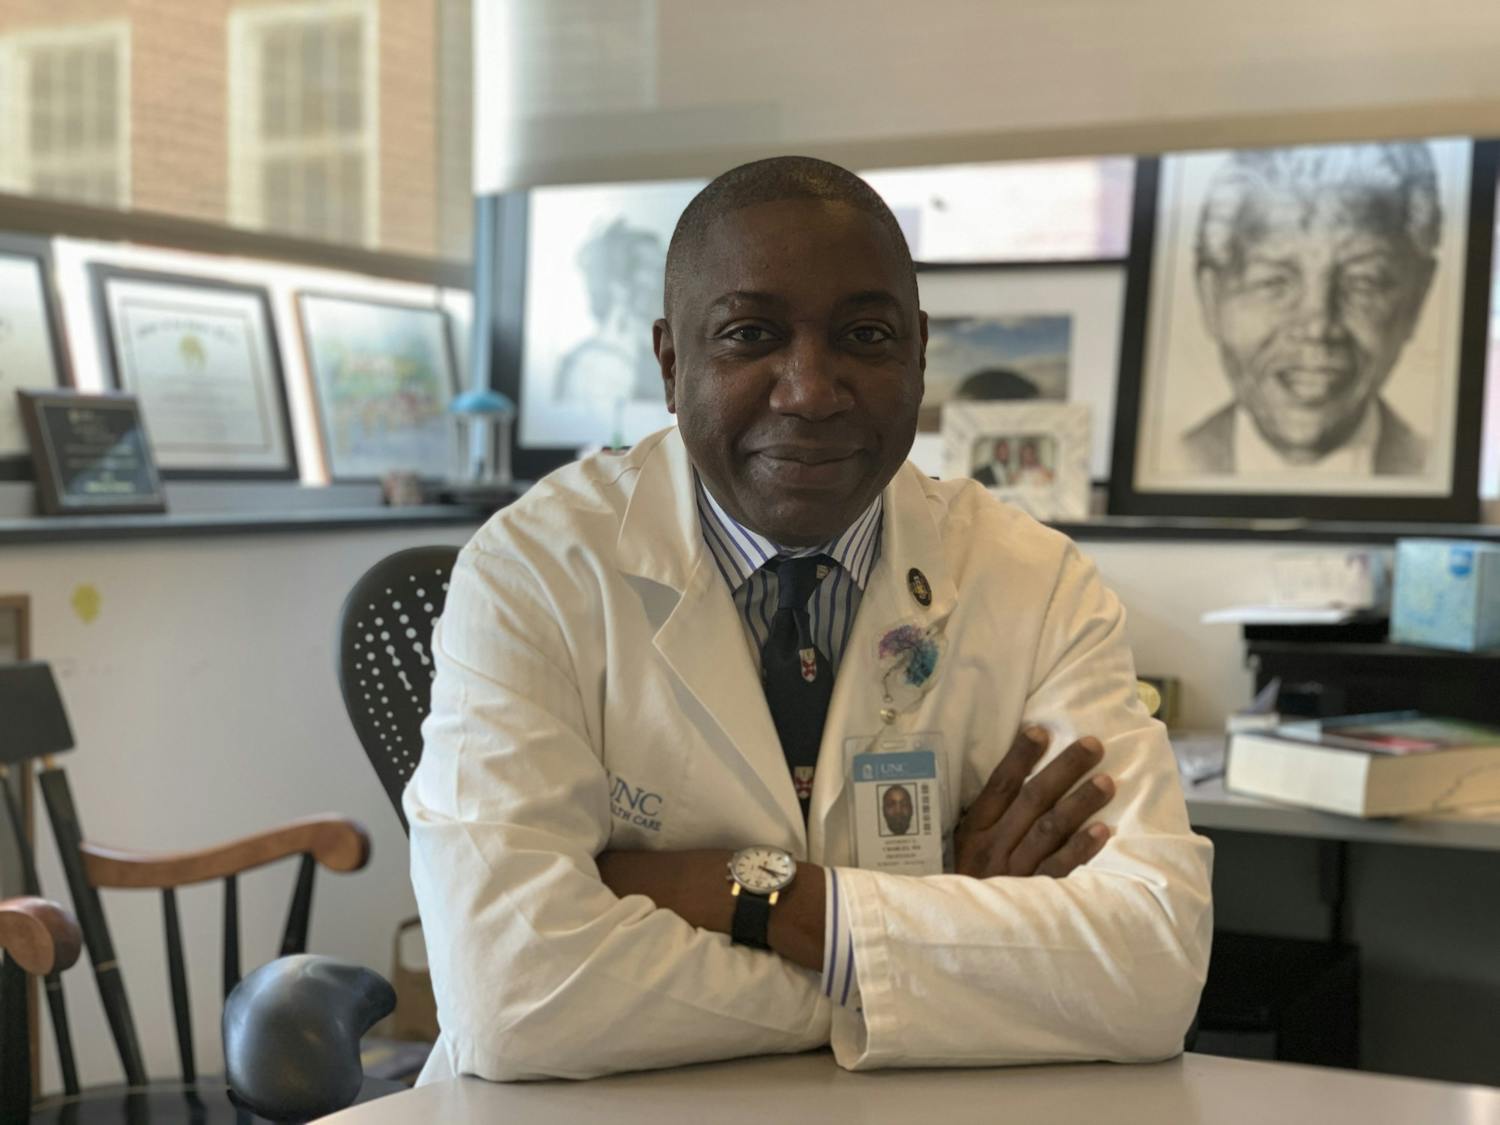 Director of global surgery at the Institute of Global Health and Infectious Diseases at the UNC School of Medicine Dr. Anthony Charles poses for a portrait on April 18, 2021. Dr. Charles is working to improve surgical quality in middle to low income N.C. counties.&nbsp;